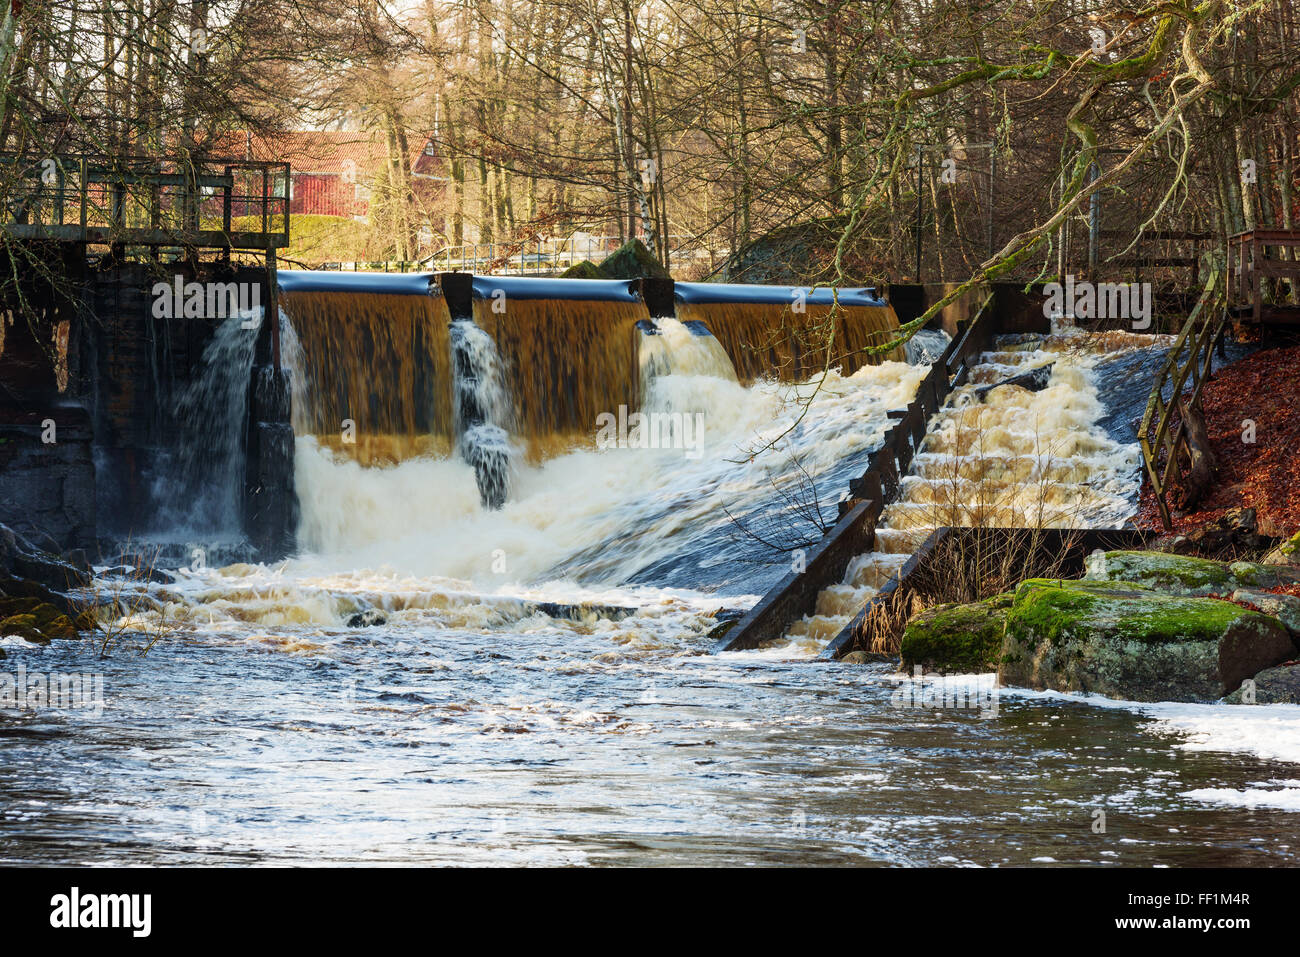 A small dam with surrounding forestland. A fish ladder helps fish migrate. House visible in background. Snittingefallet in Bleki Stock Photo